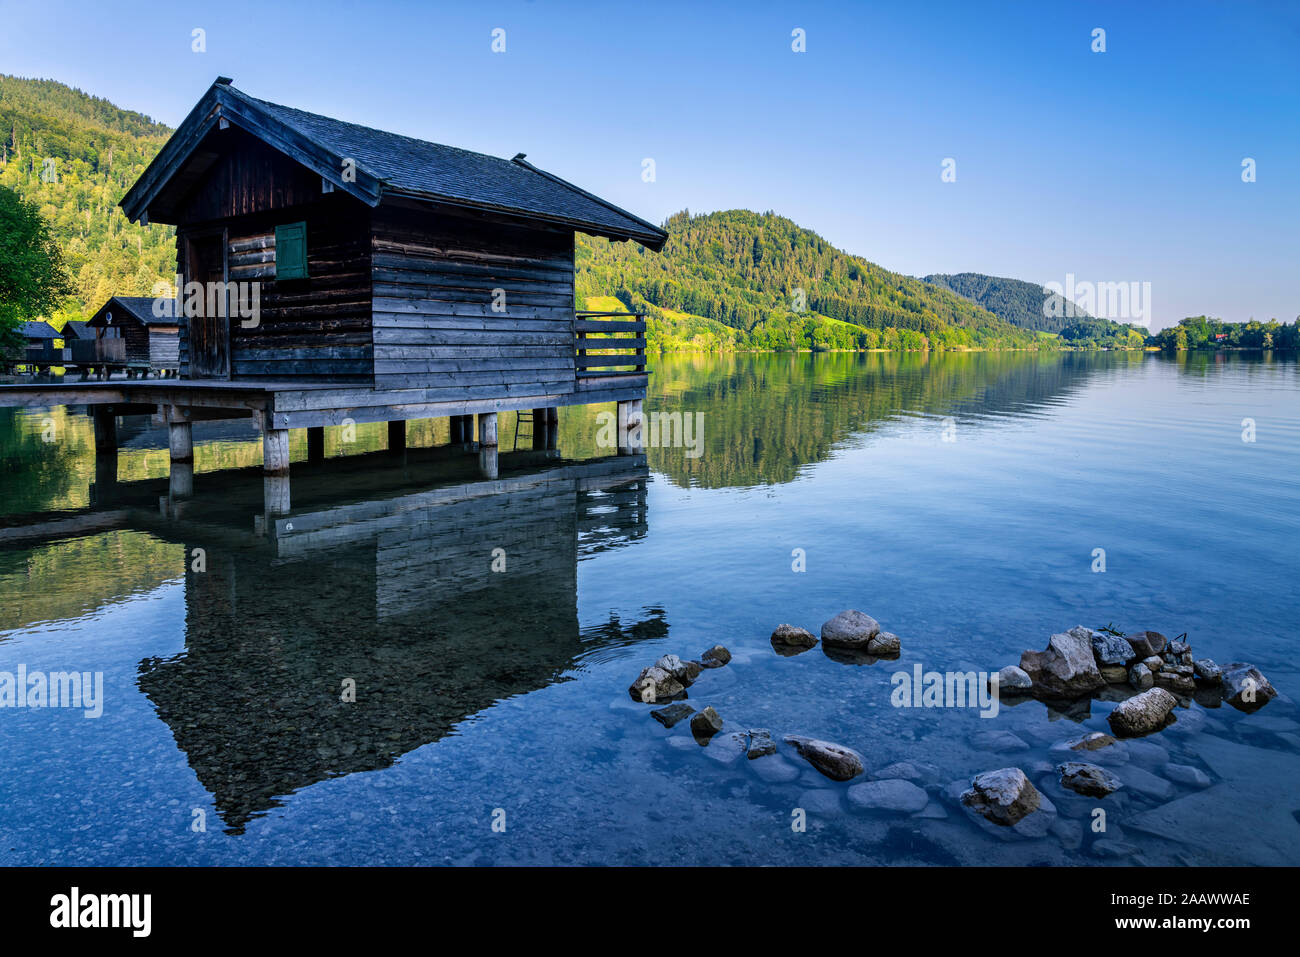 Boathouse at Schliersee lake against clear sky, Mangfallgebirge, Germany Stock Photo